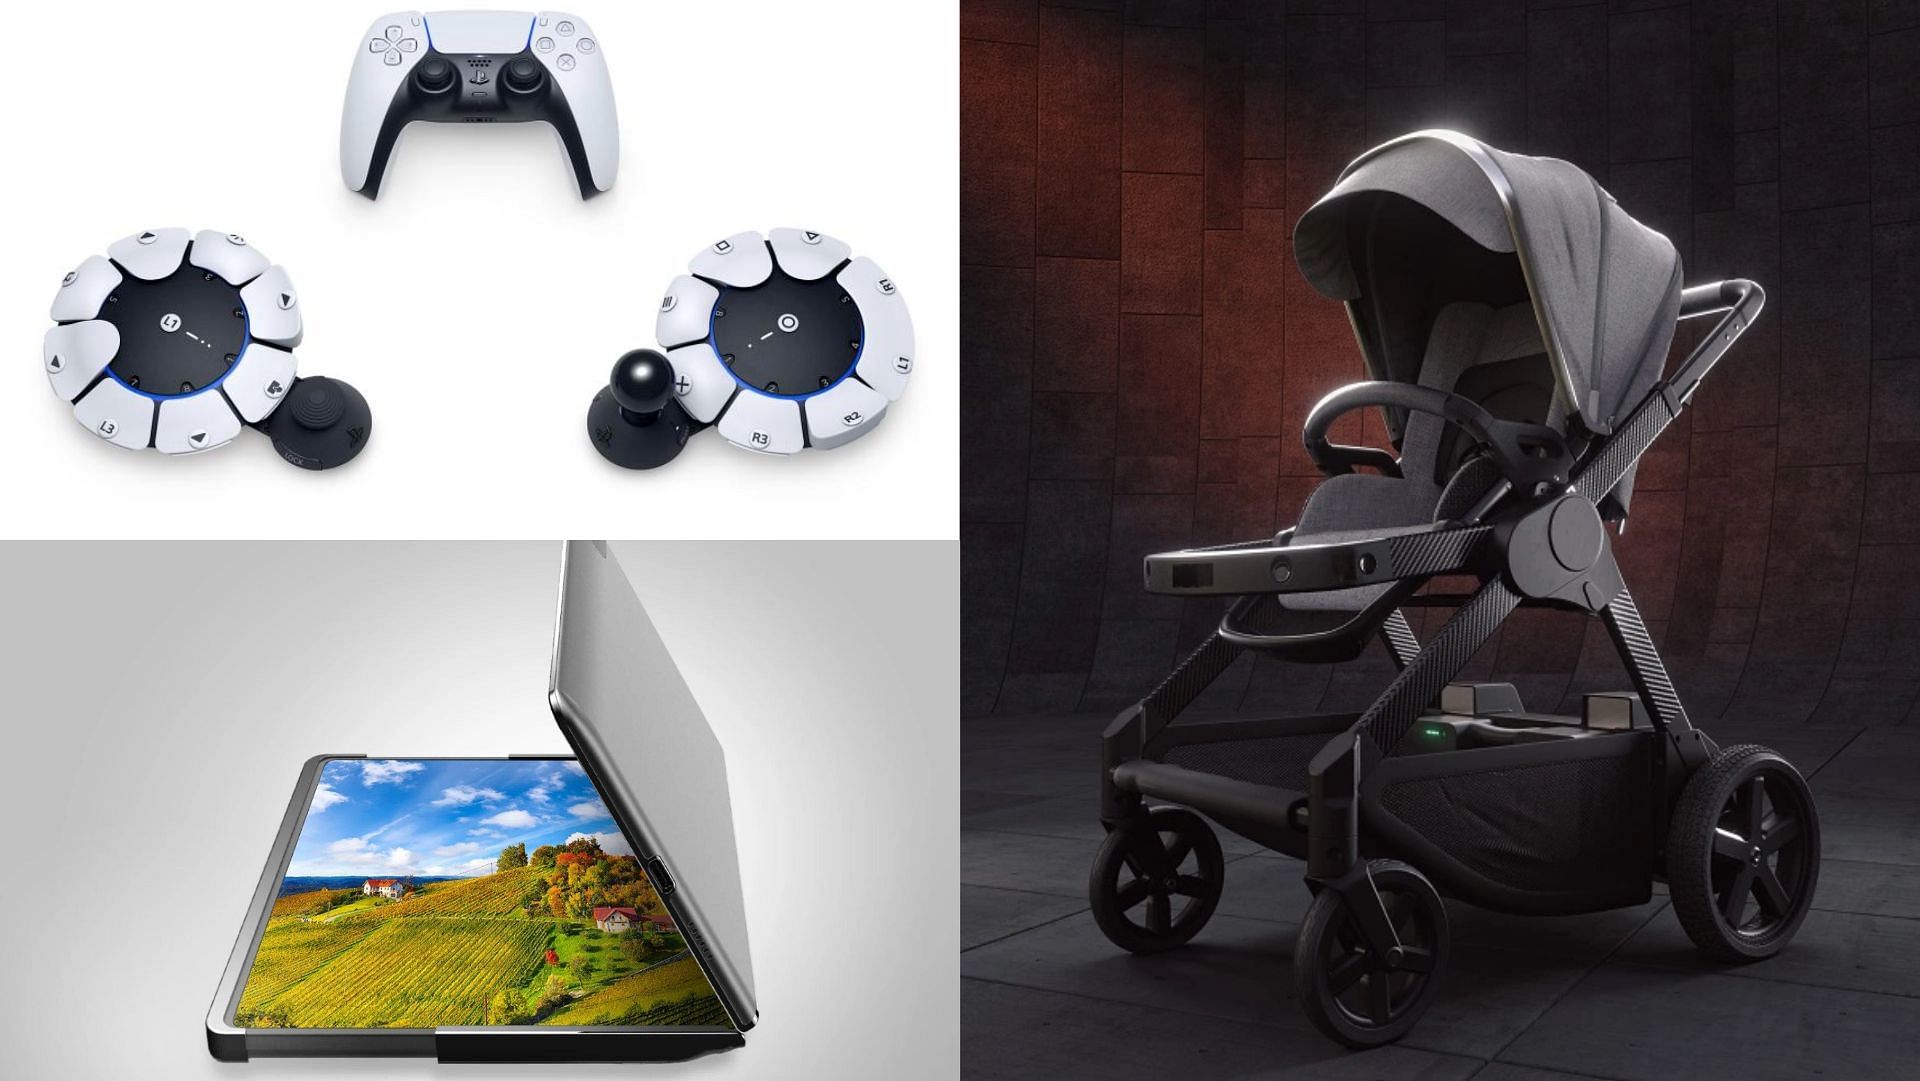 Future looks exciting at CES (Image by Samsung, PlayStation and GluxKind)